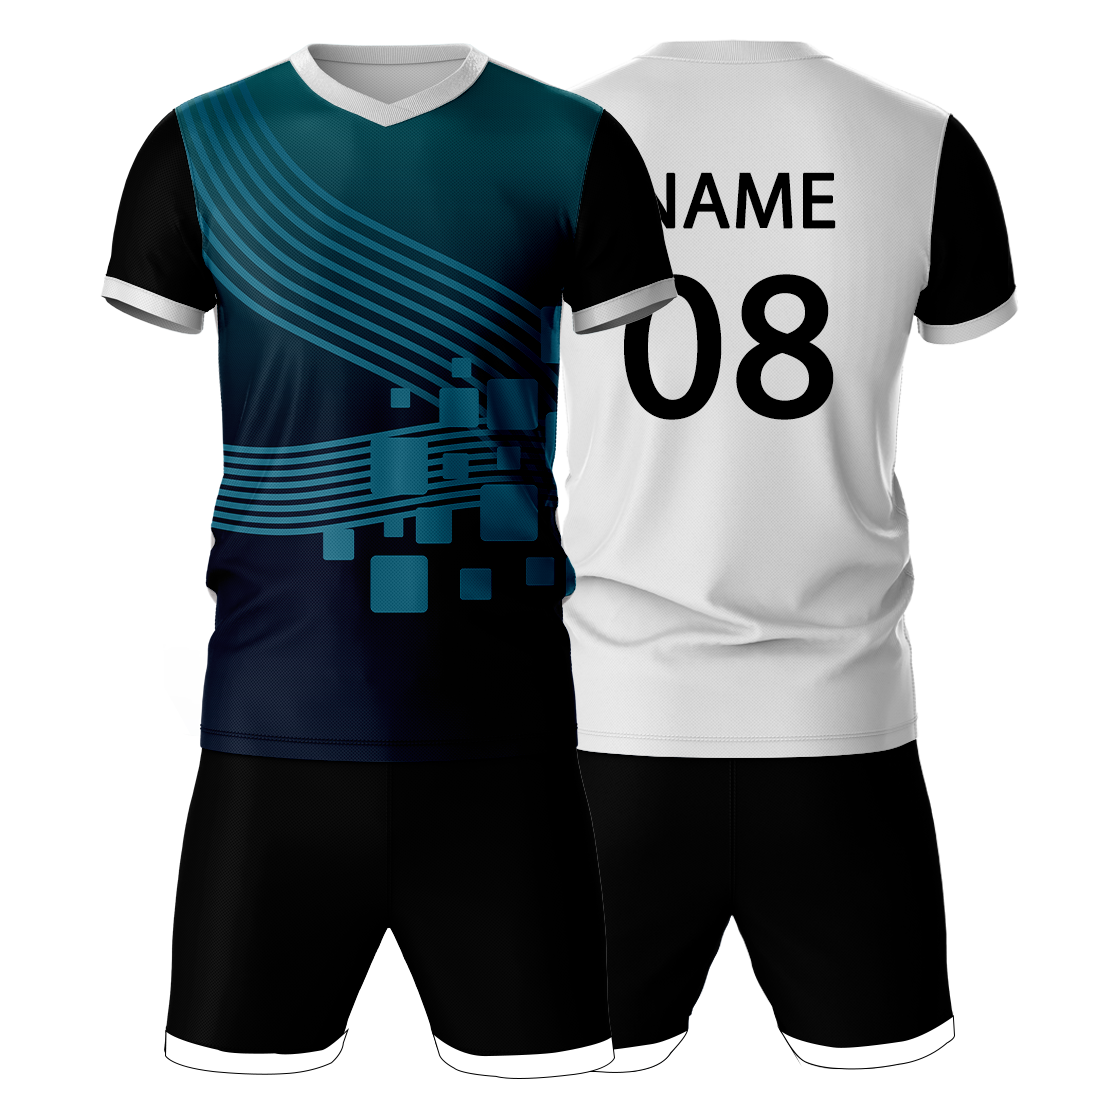 All Over Printed Jersey With Shorts Name & Number Printed.NP50000690